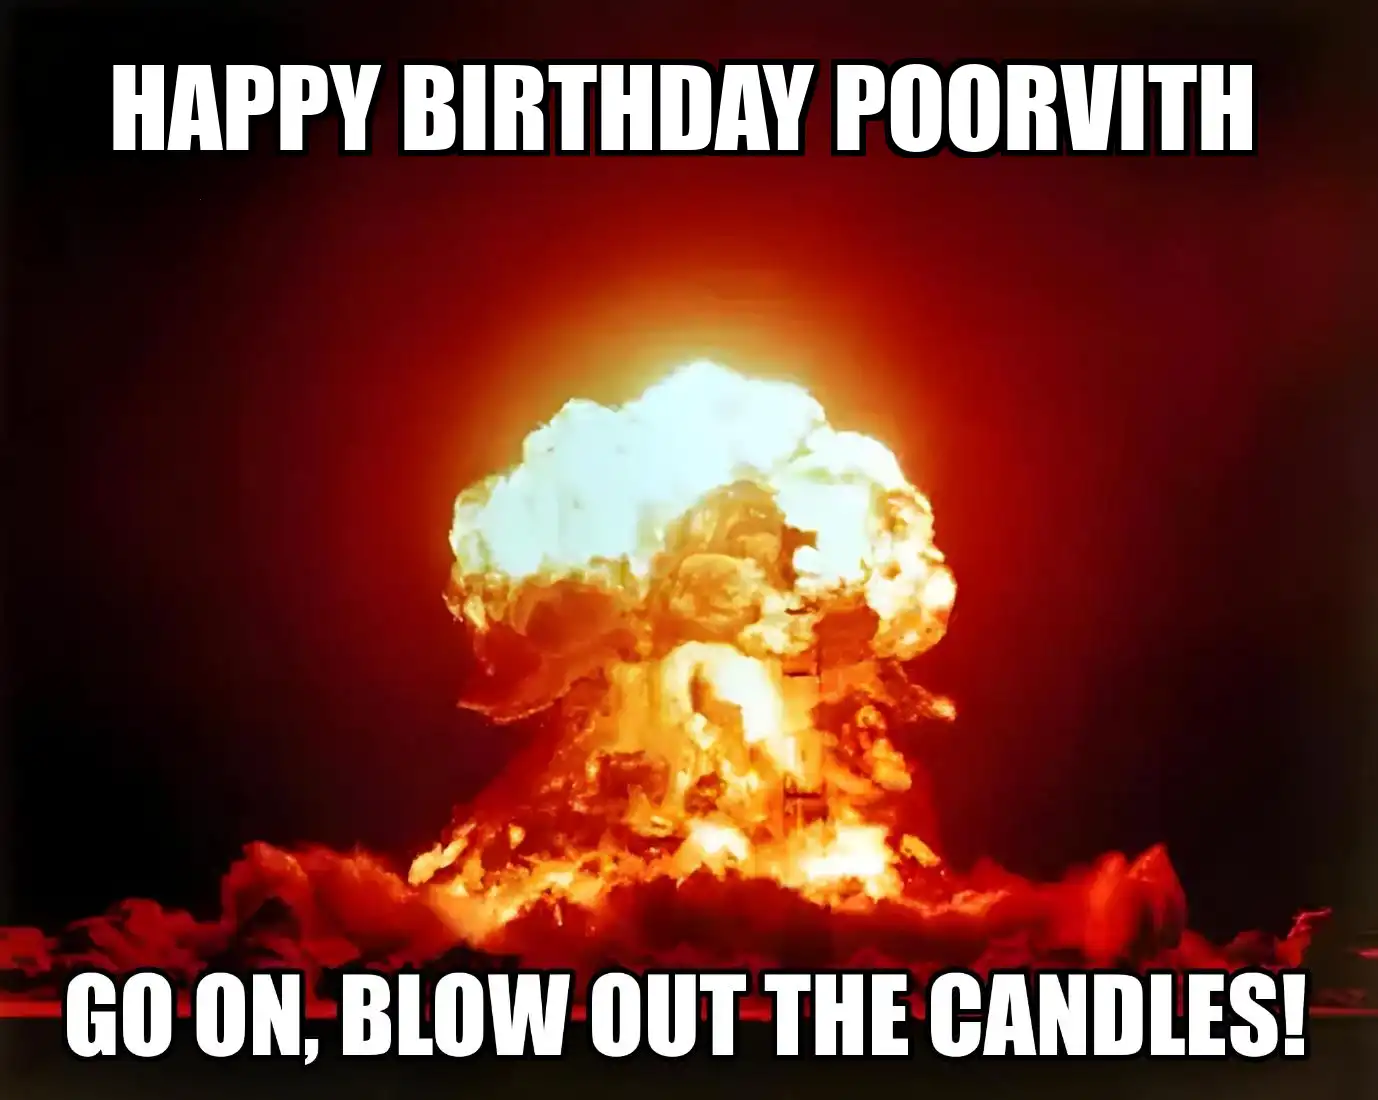 Happy Birthday Poorvith Go On Blow Out The Candles Meme